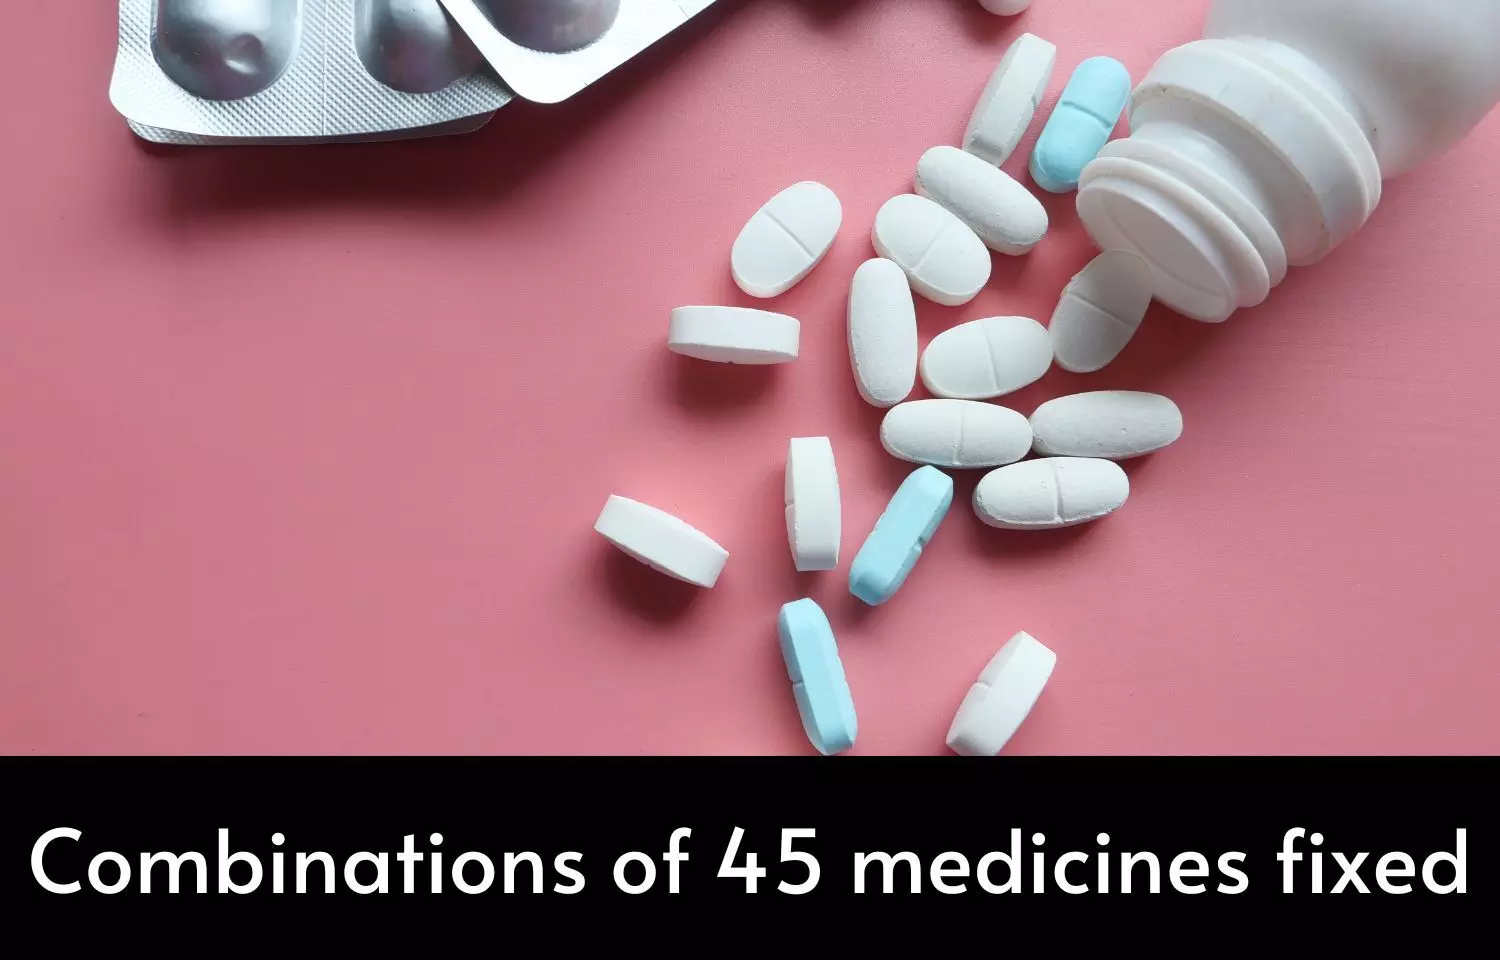 Combinations of 45 medicines fixed, including Sitagliptin- Metformin, Linagliptin -Metformin  combinations